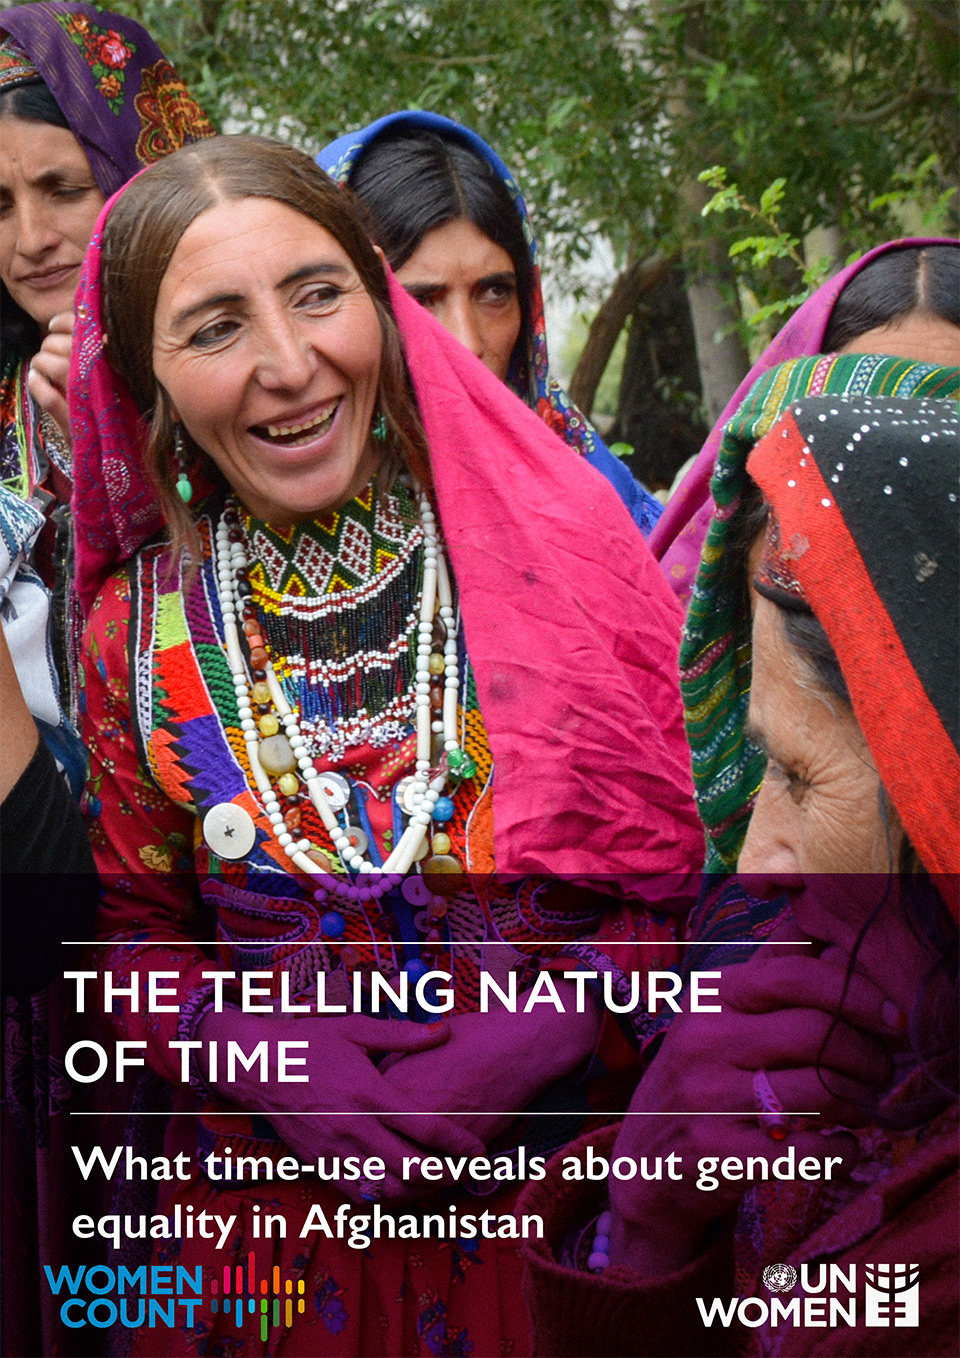 The Telling Nature of Time: What time-use reveals about gender equality in Afghanistan